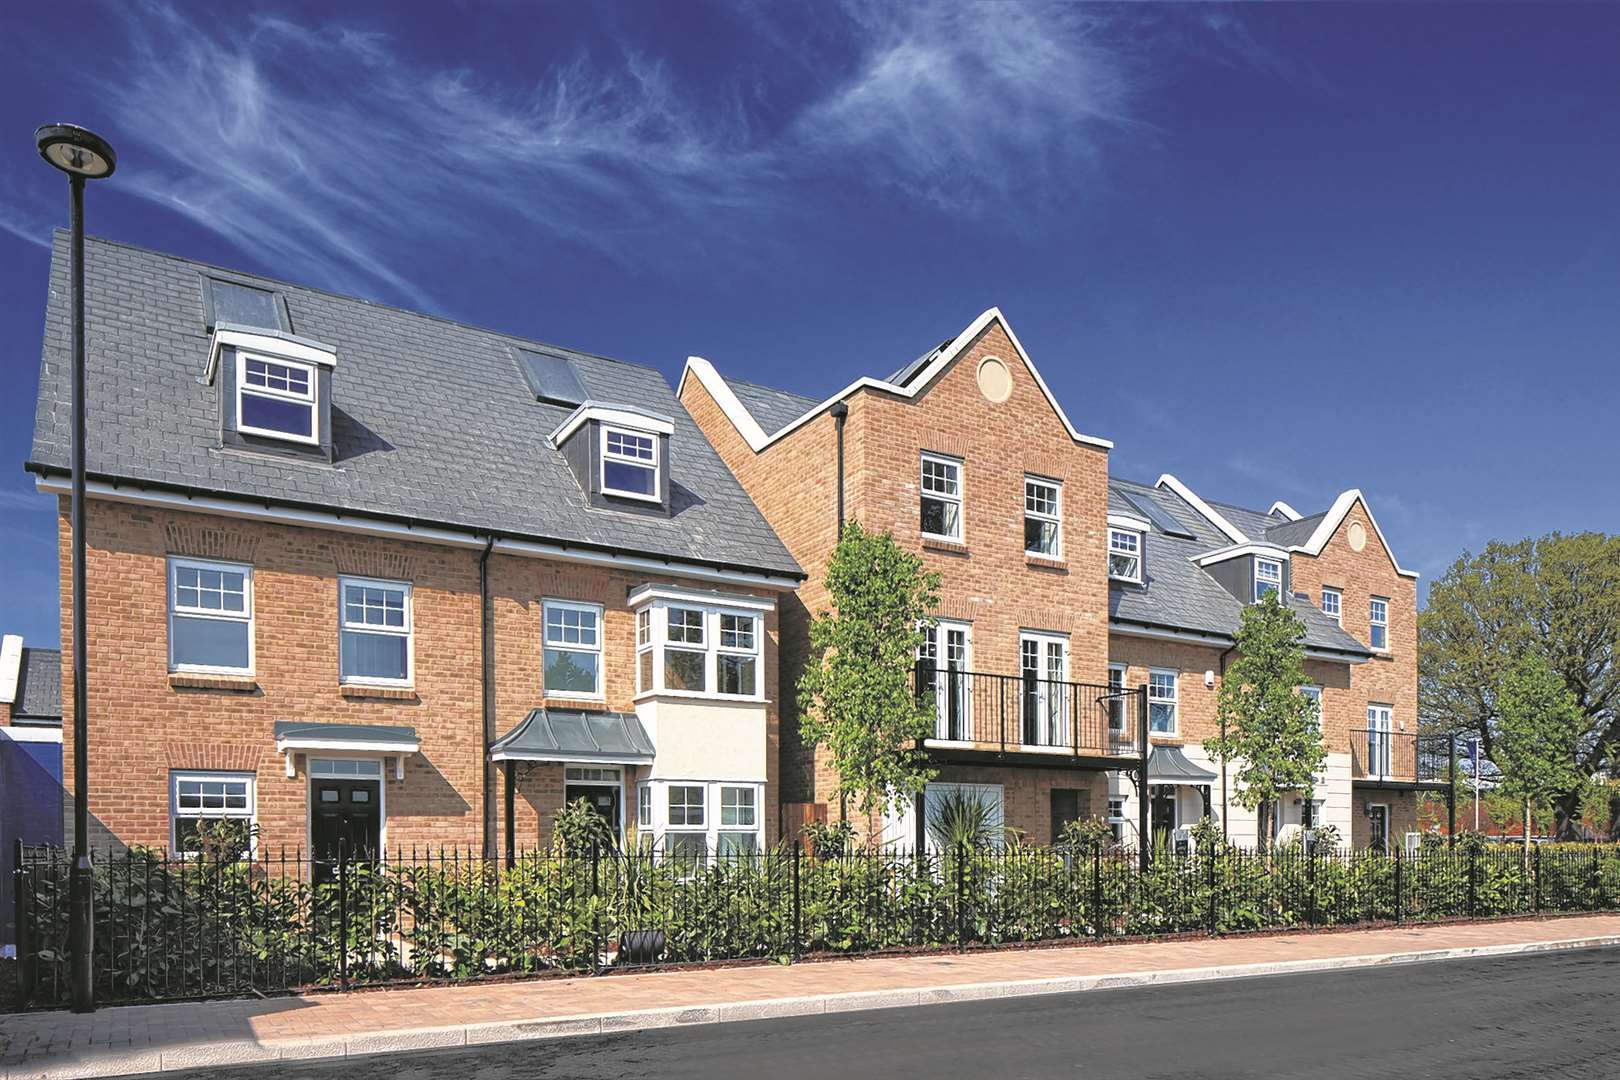 A typical Ward Homes development